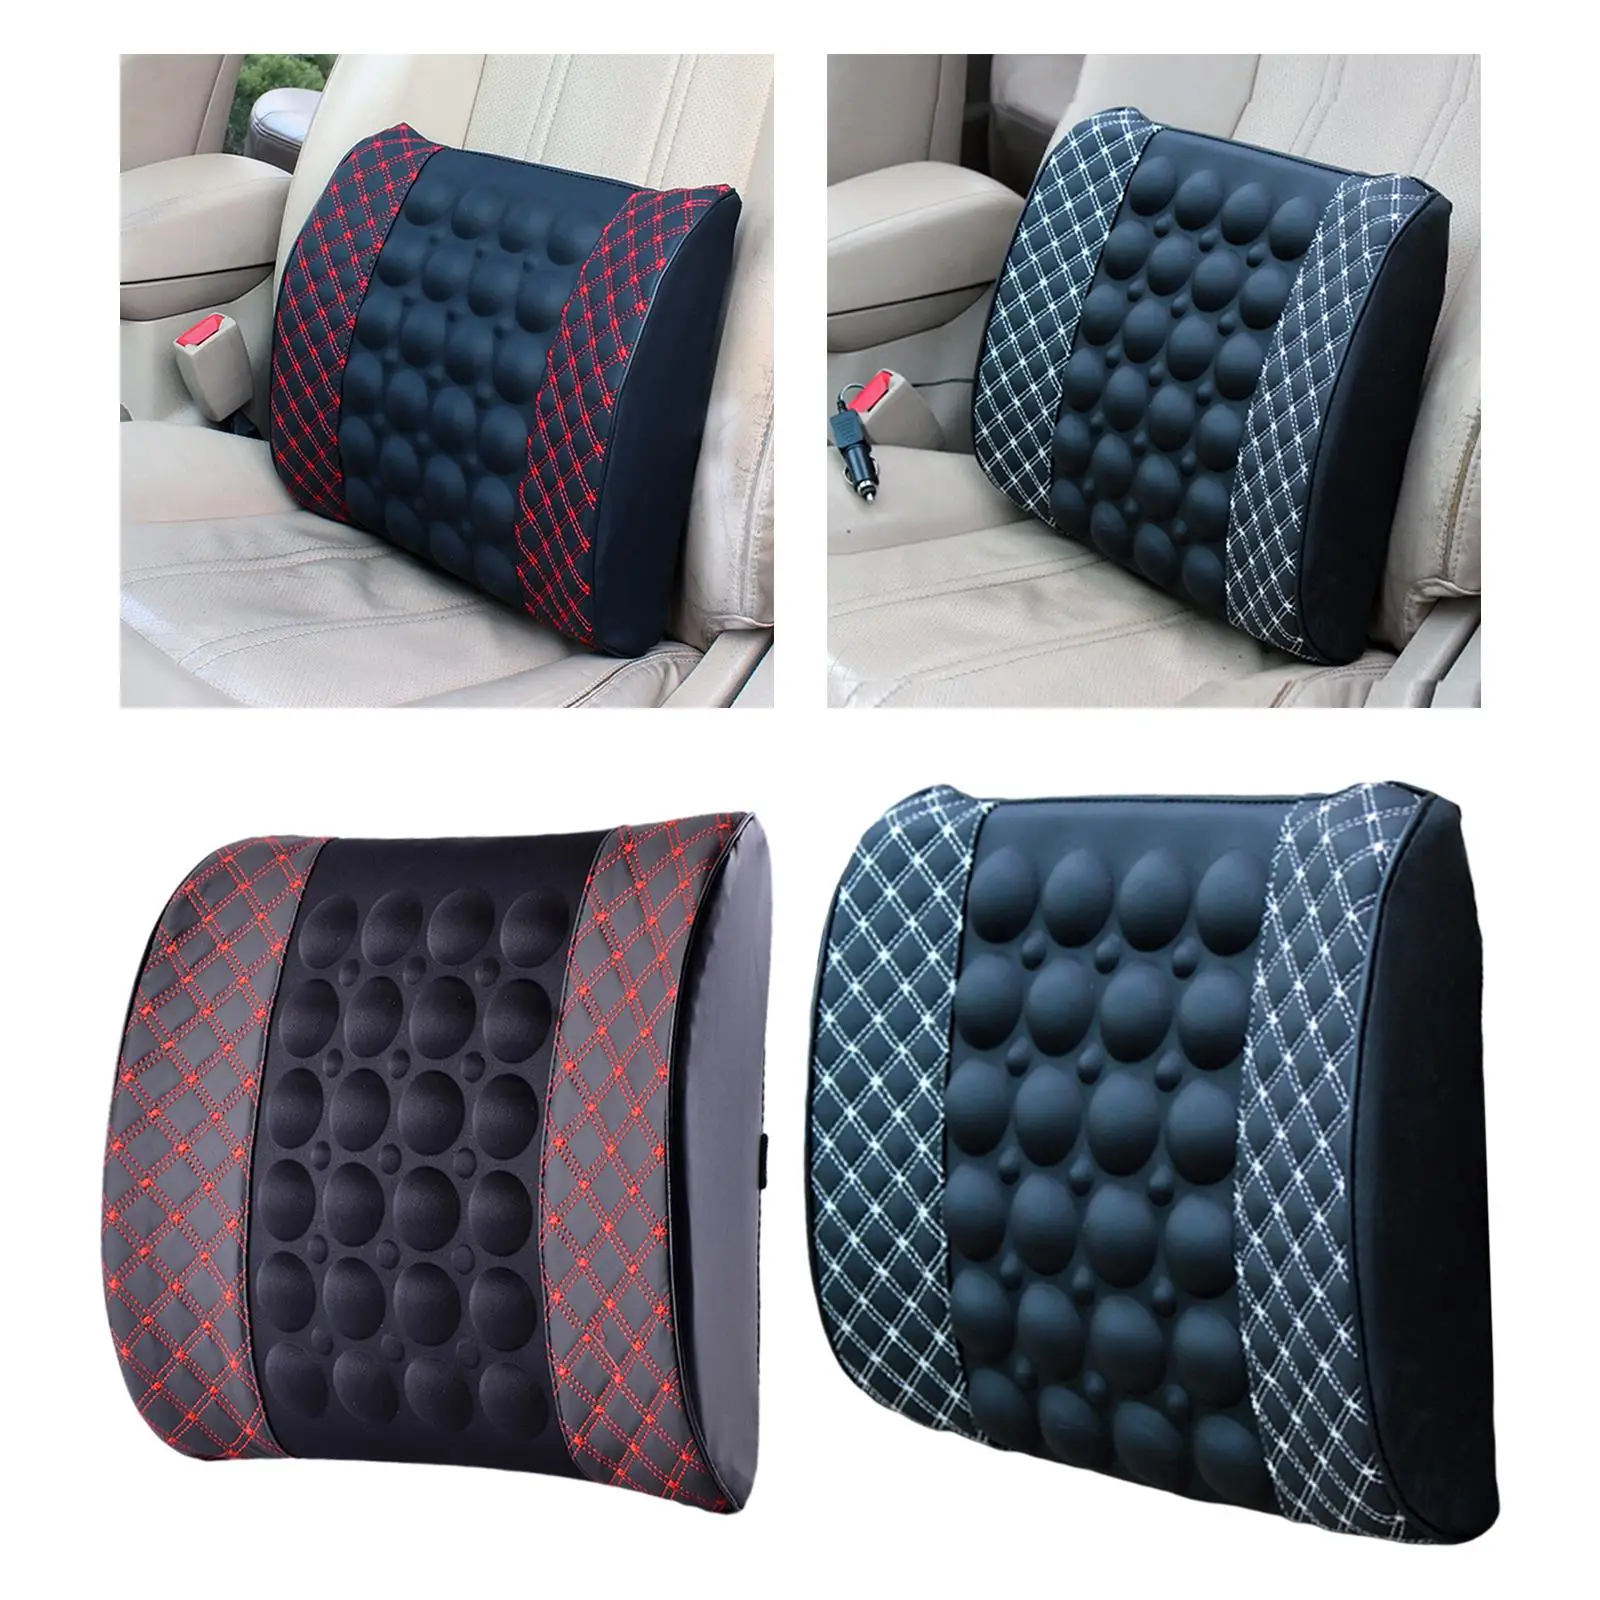 Car Support Pillow Seat Back for Relaxation